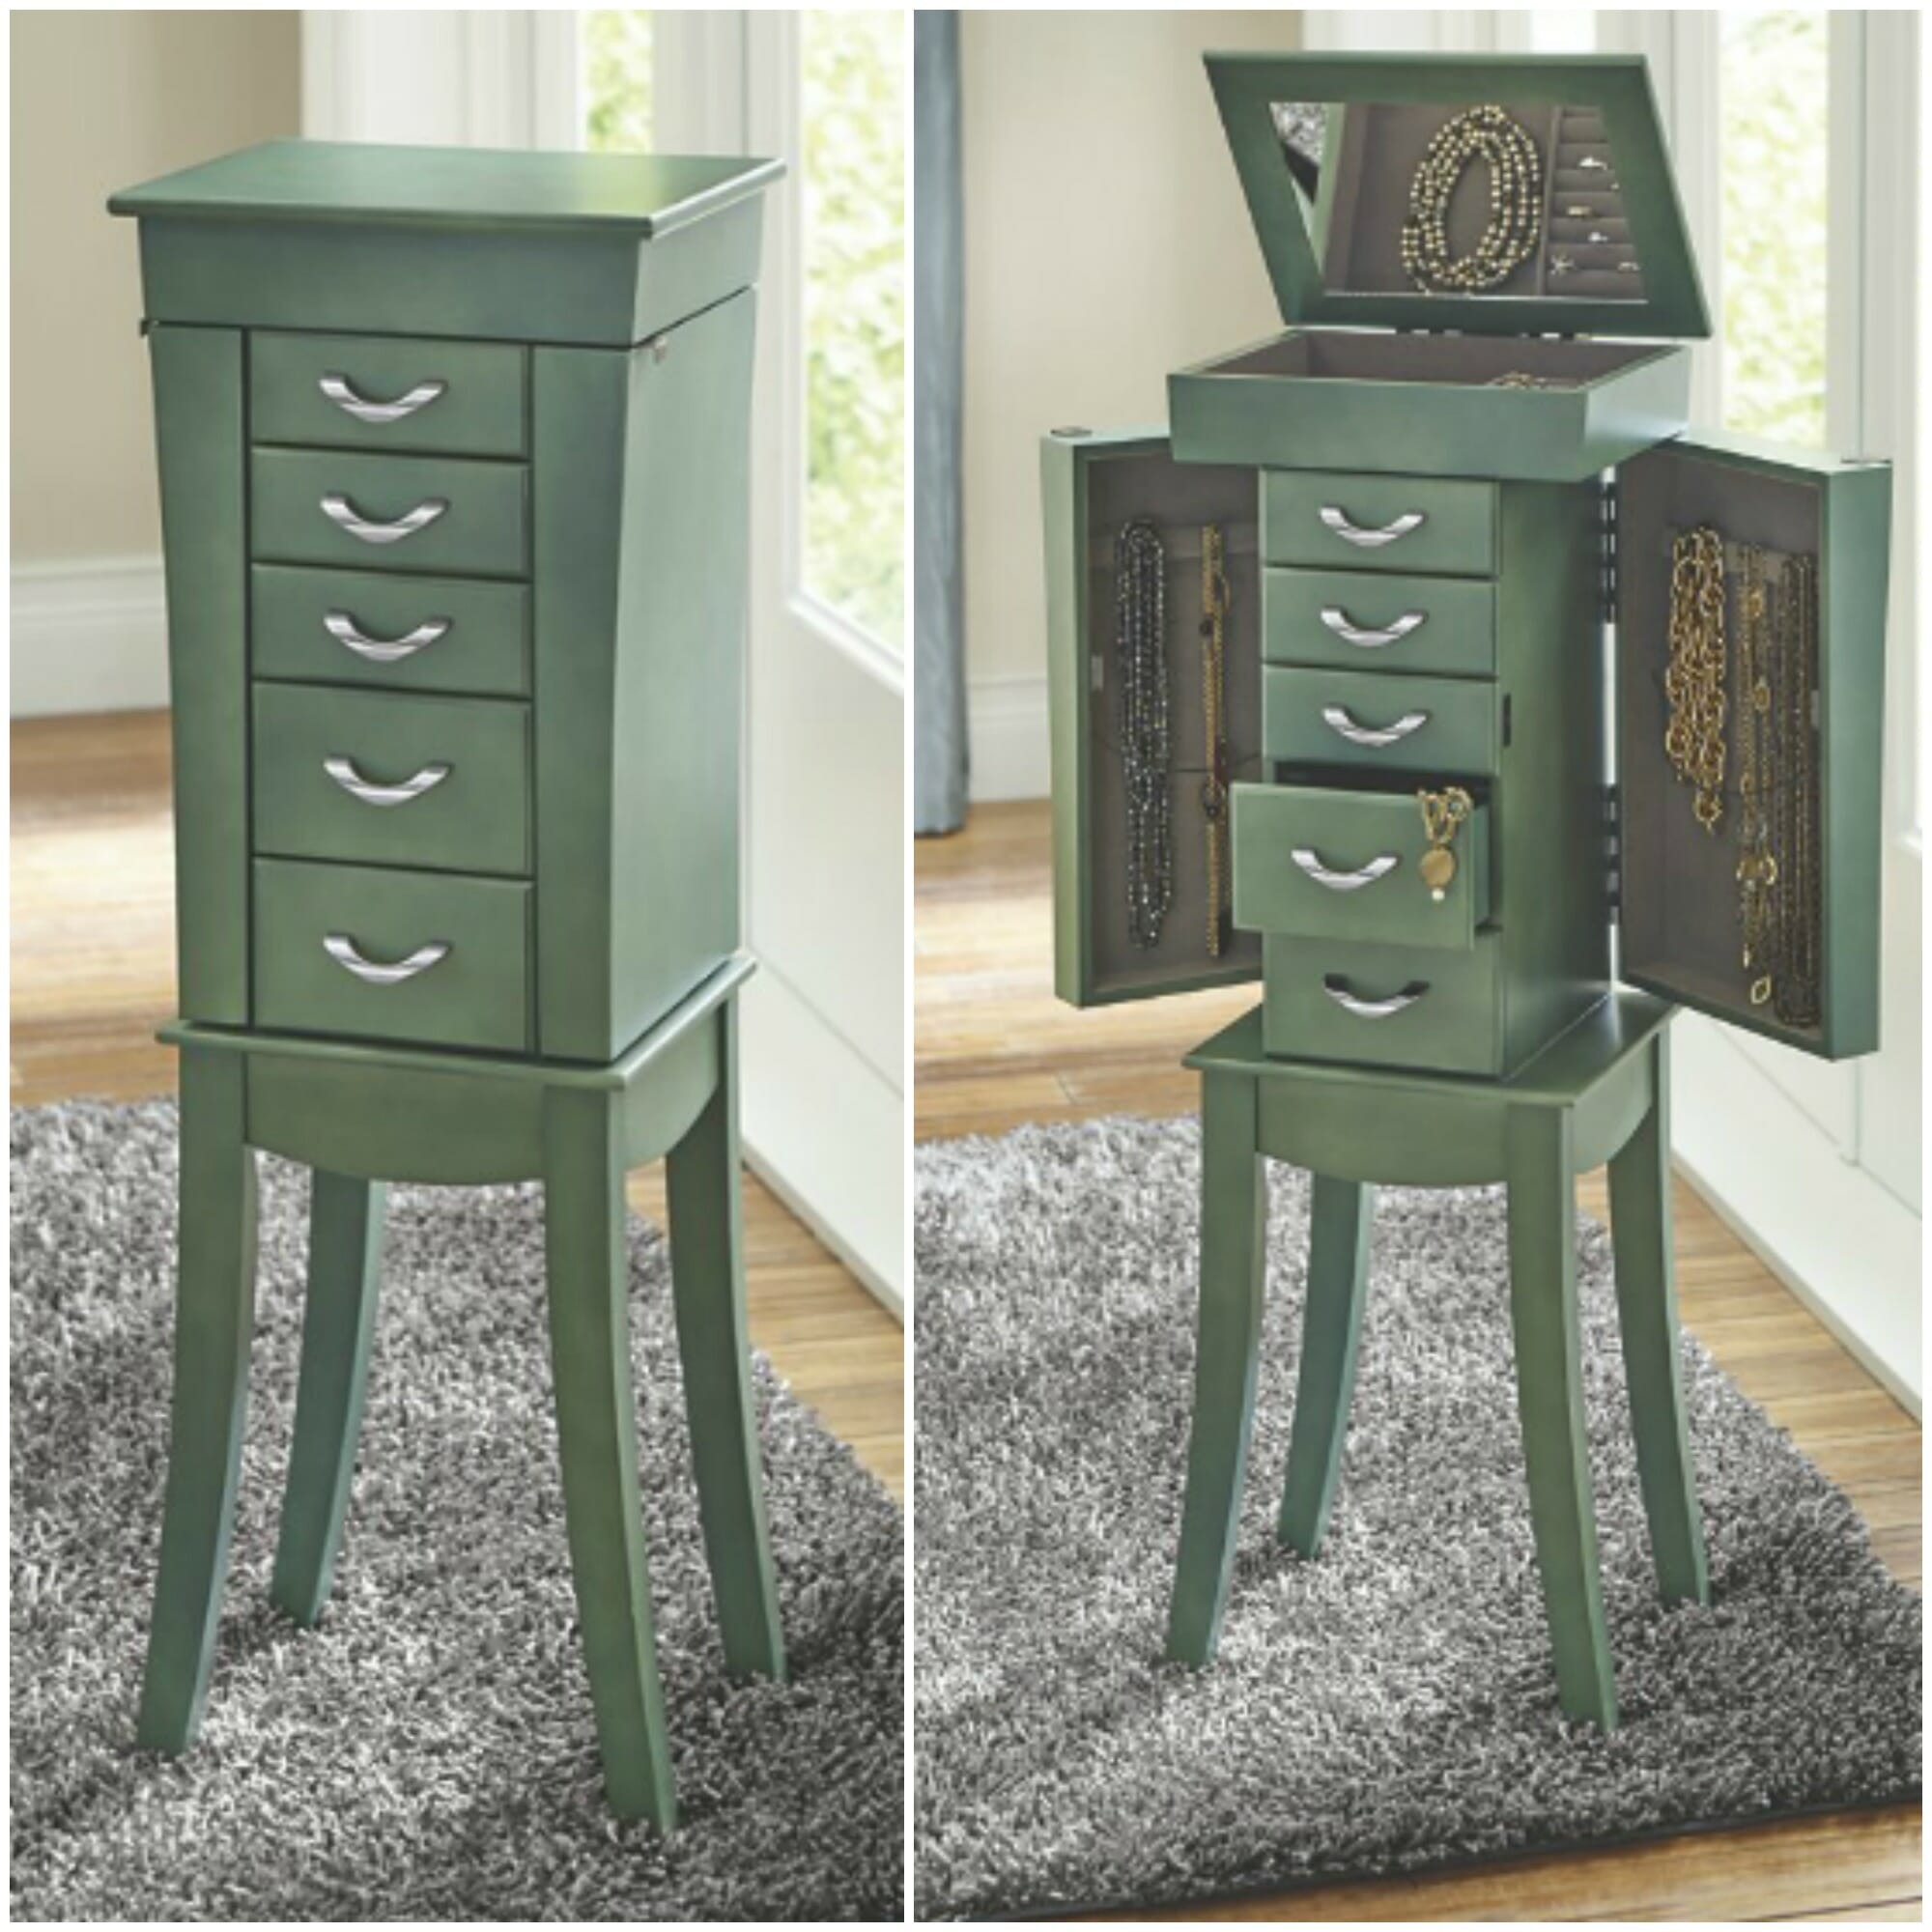 A moss green jewelry armoire, shown with drawers closed and with drawers and mirrored top opened, displaying necklaces.